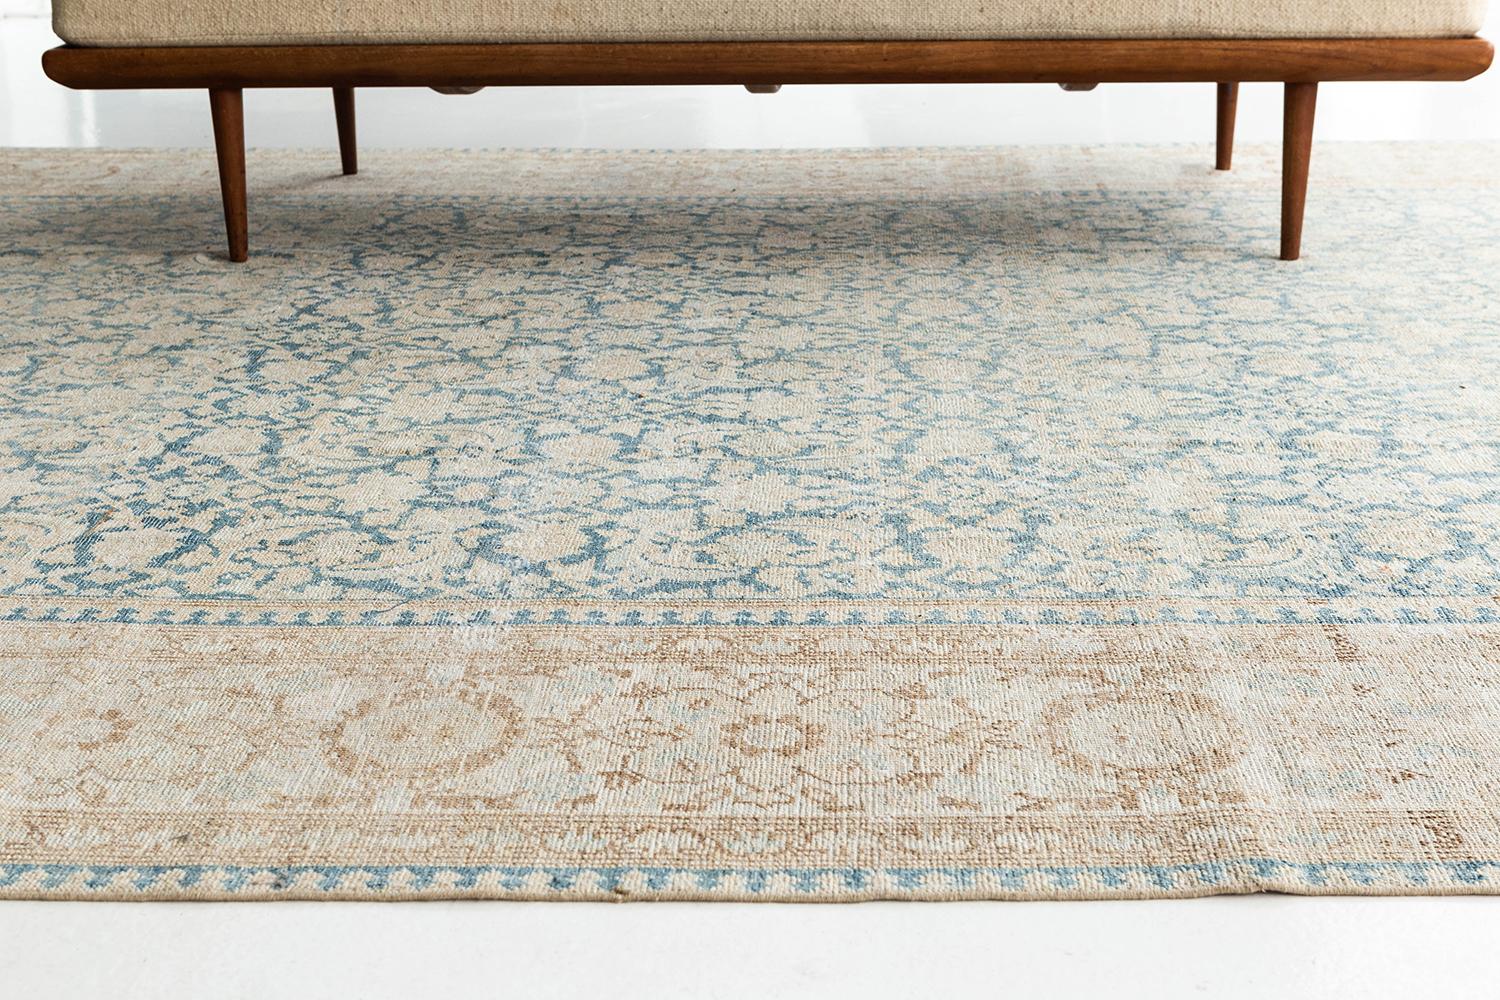 An antique Persian Mahal that is the epitome of elegance and timelessness. This Mahal features an elegant and classical all-over pattern of flowering vines and unfolding scrolls. The rug's blue, tan, and ivory colors allow for lots of versatility in